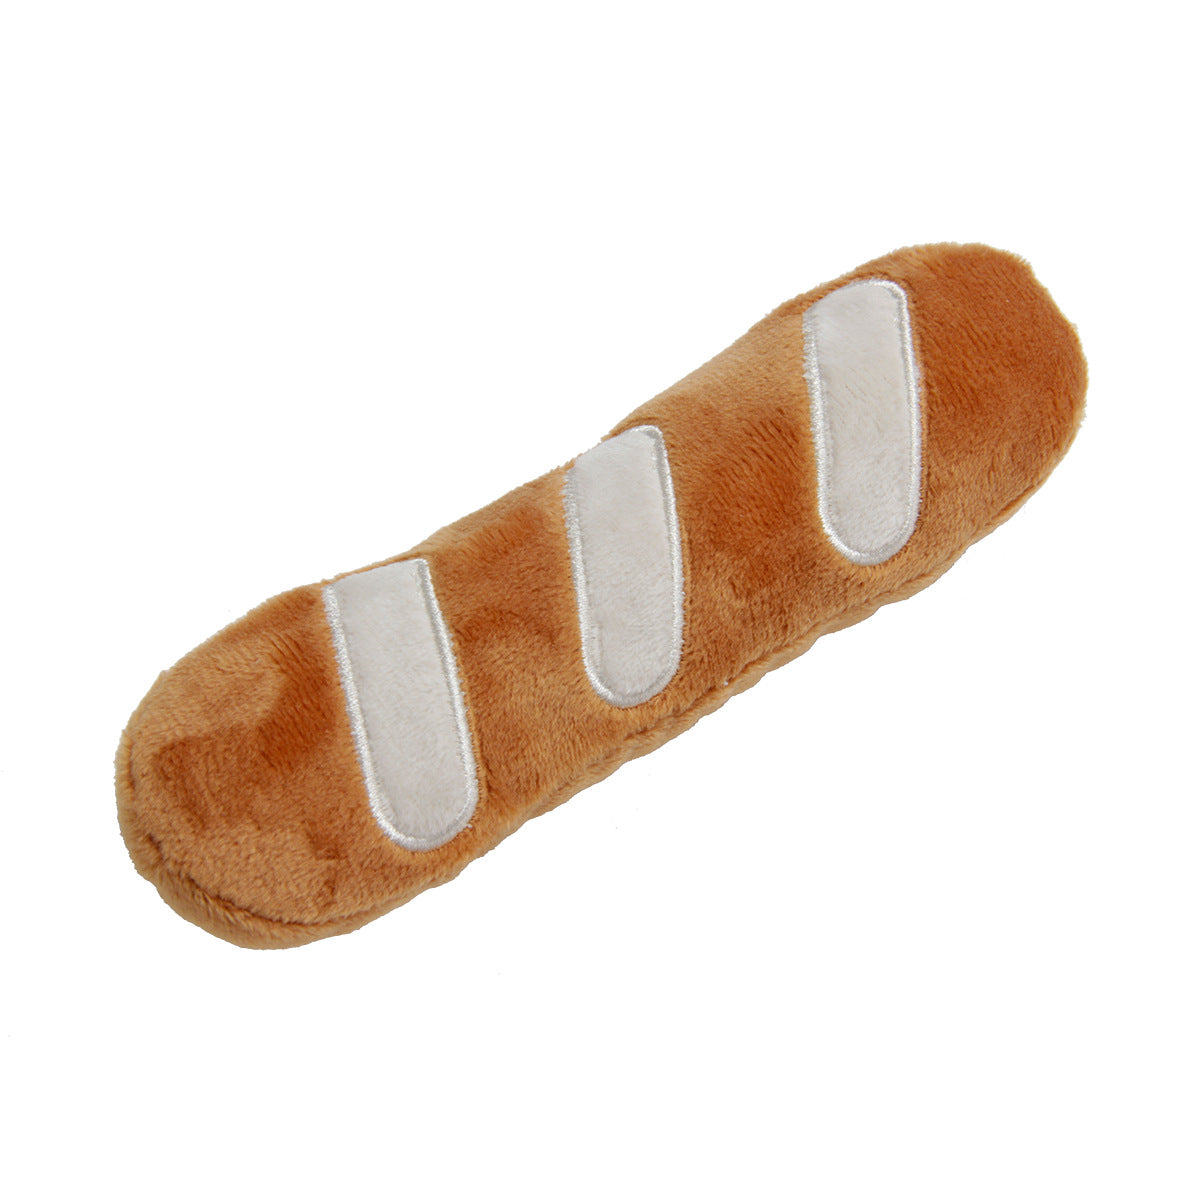 Thewisewag UAE pet dog STORE toy baguette